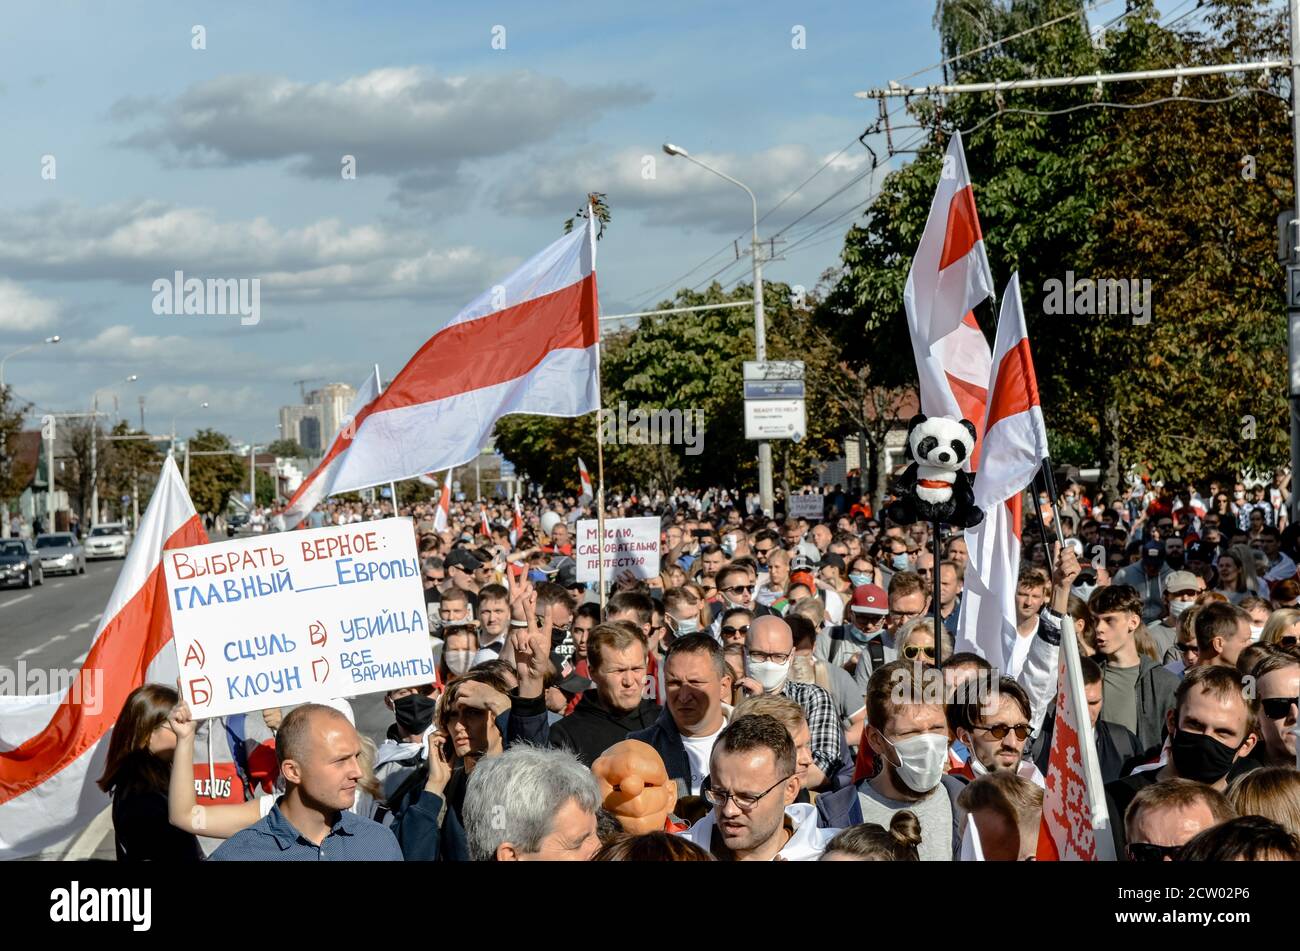 Minsk, Belarus - September 13, 2020: Belarusian people participate in peaceful protest after presidential elections in Belarus. Stock Photo